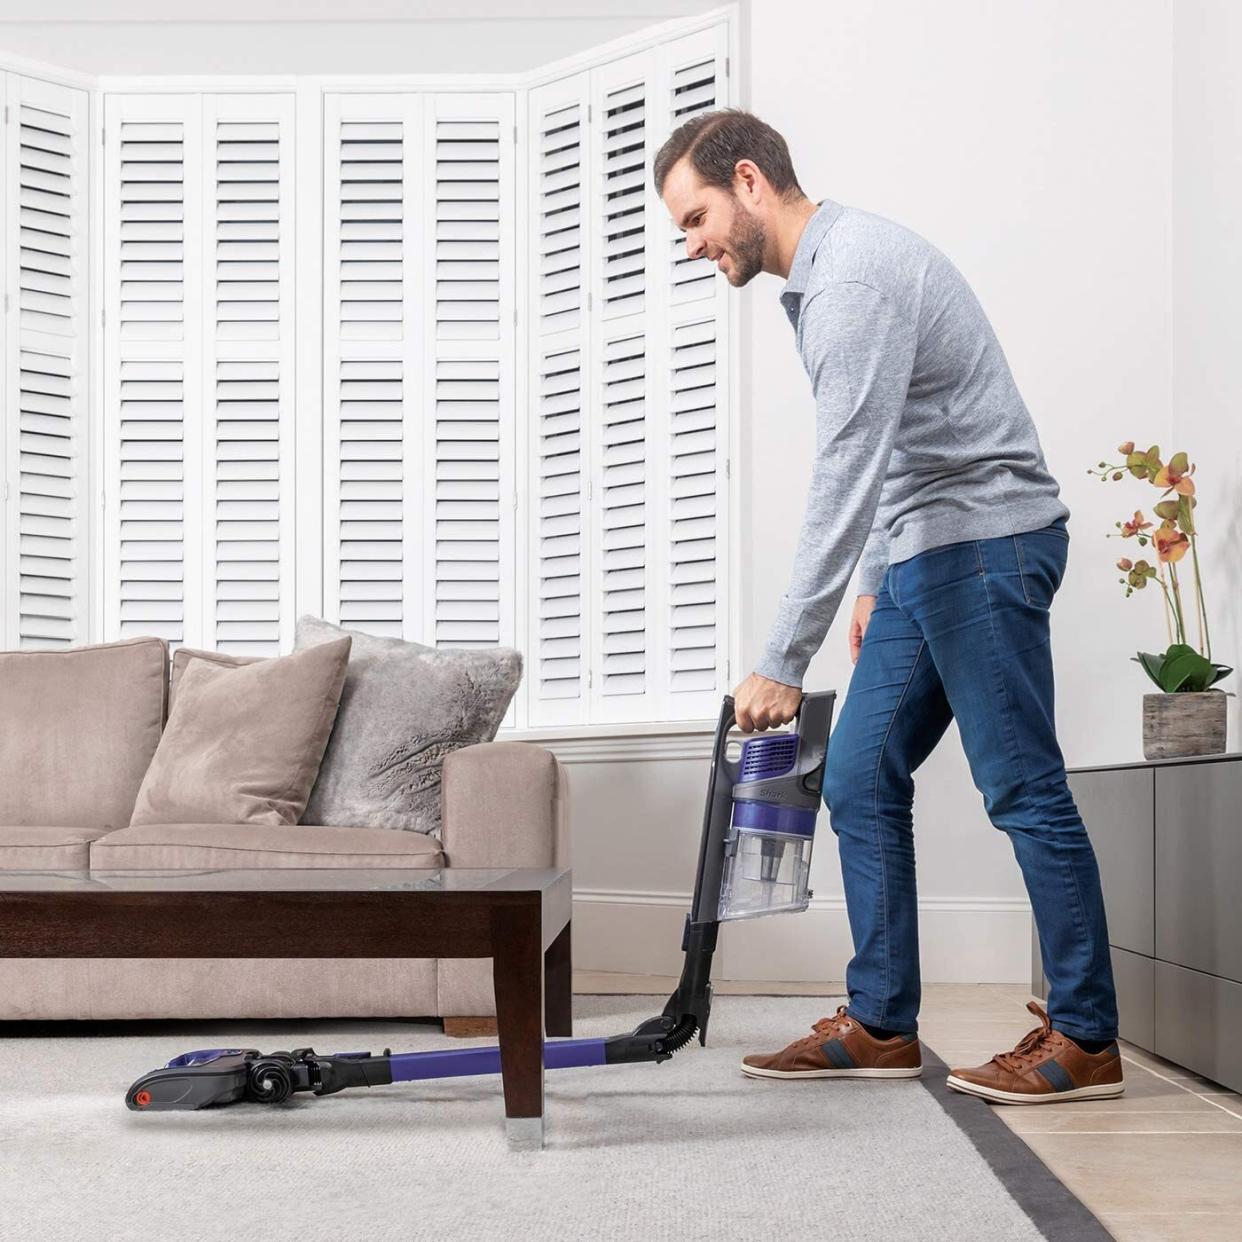 Make cleaning a doddle with this clever gadget. (Dyson)